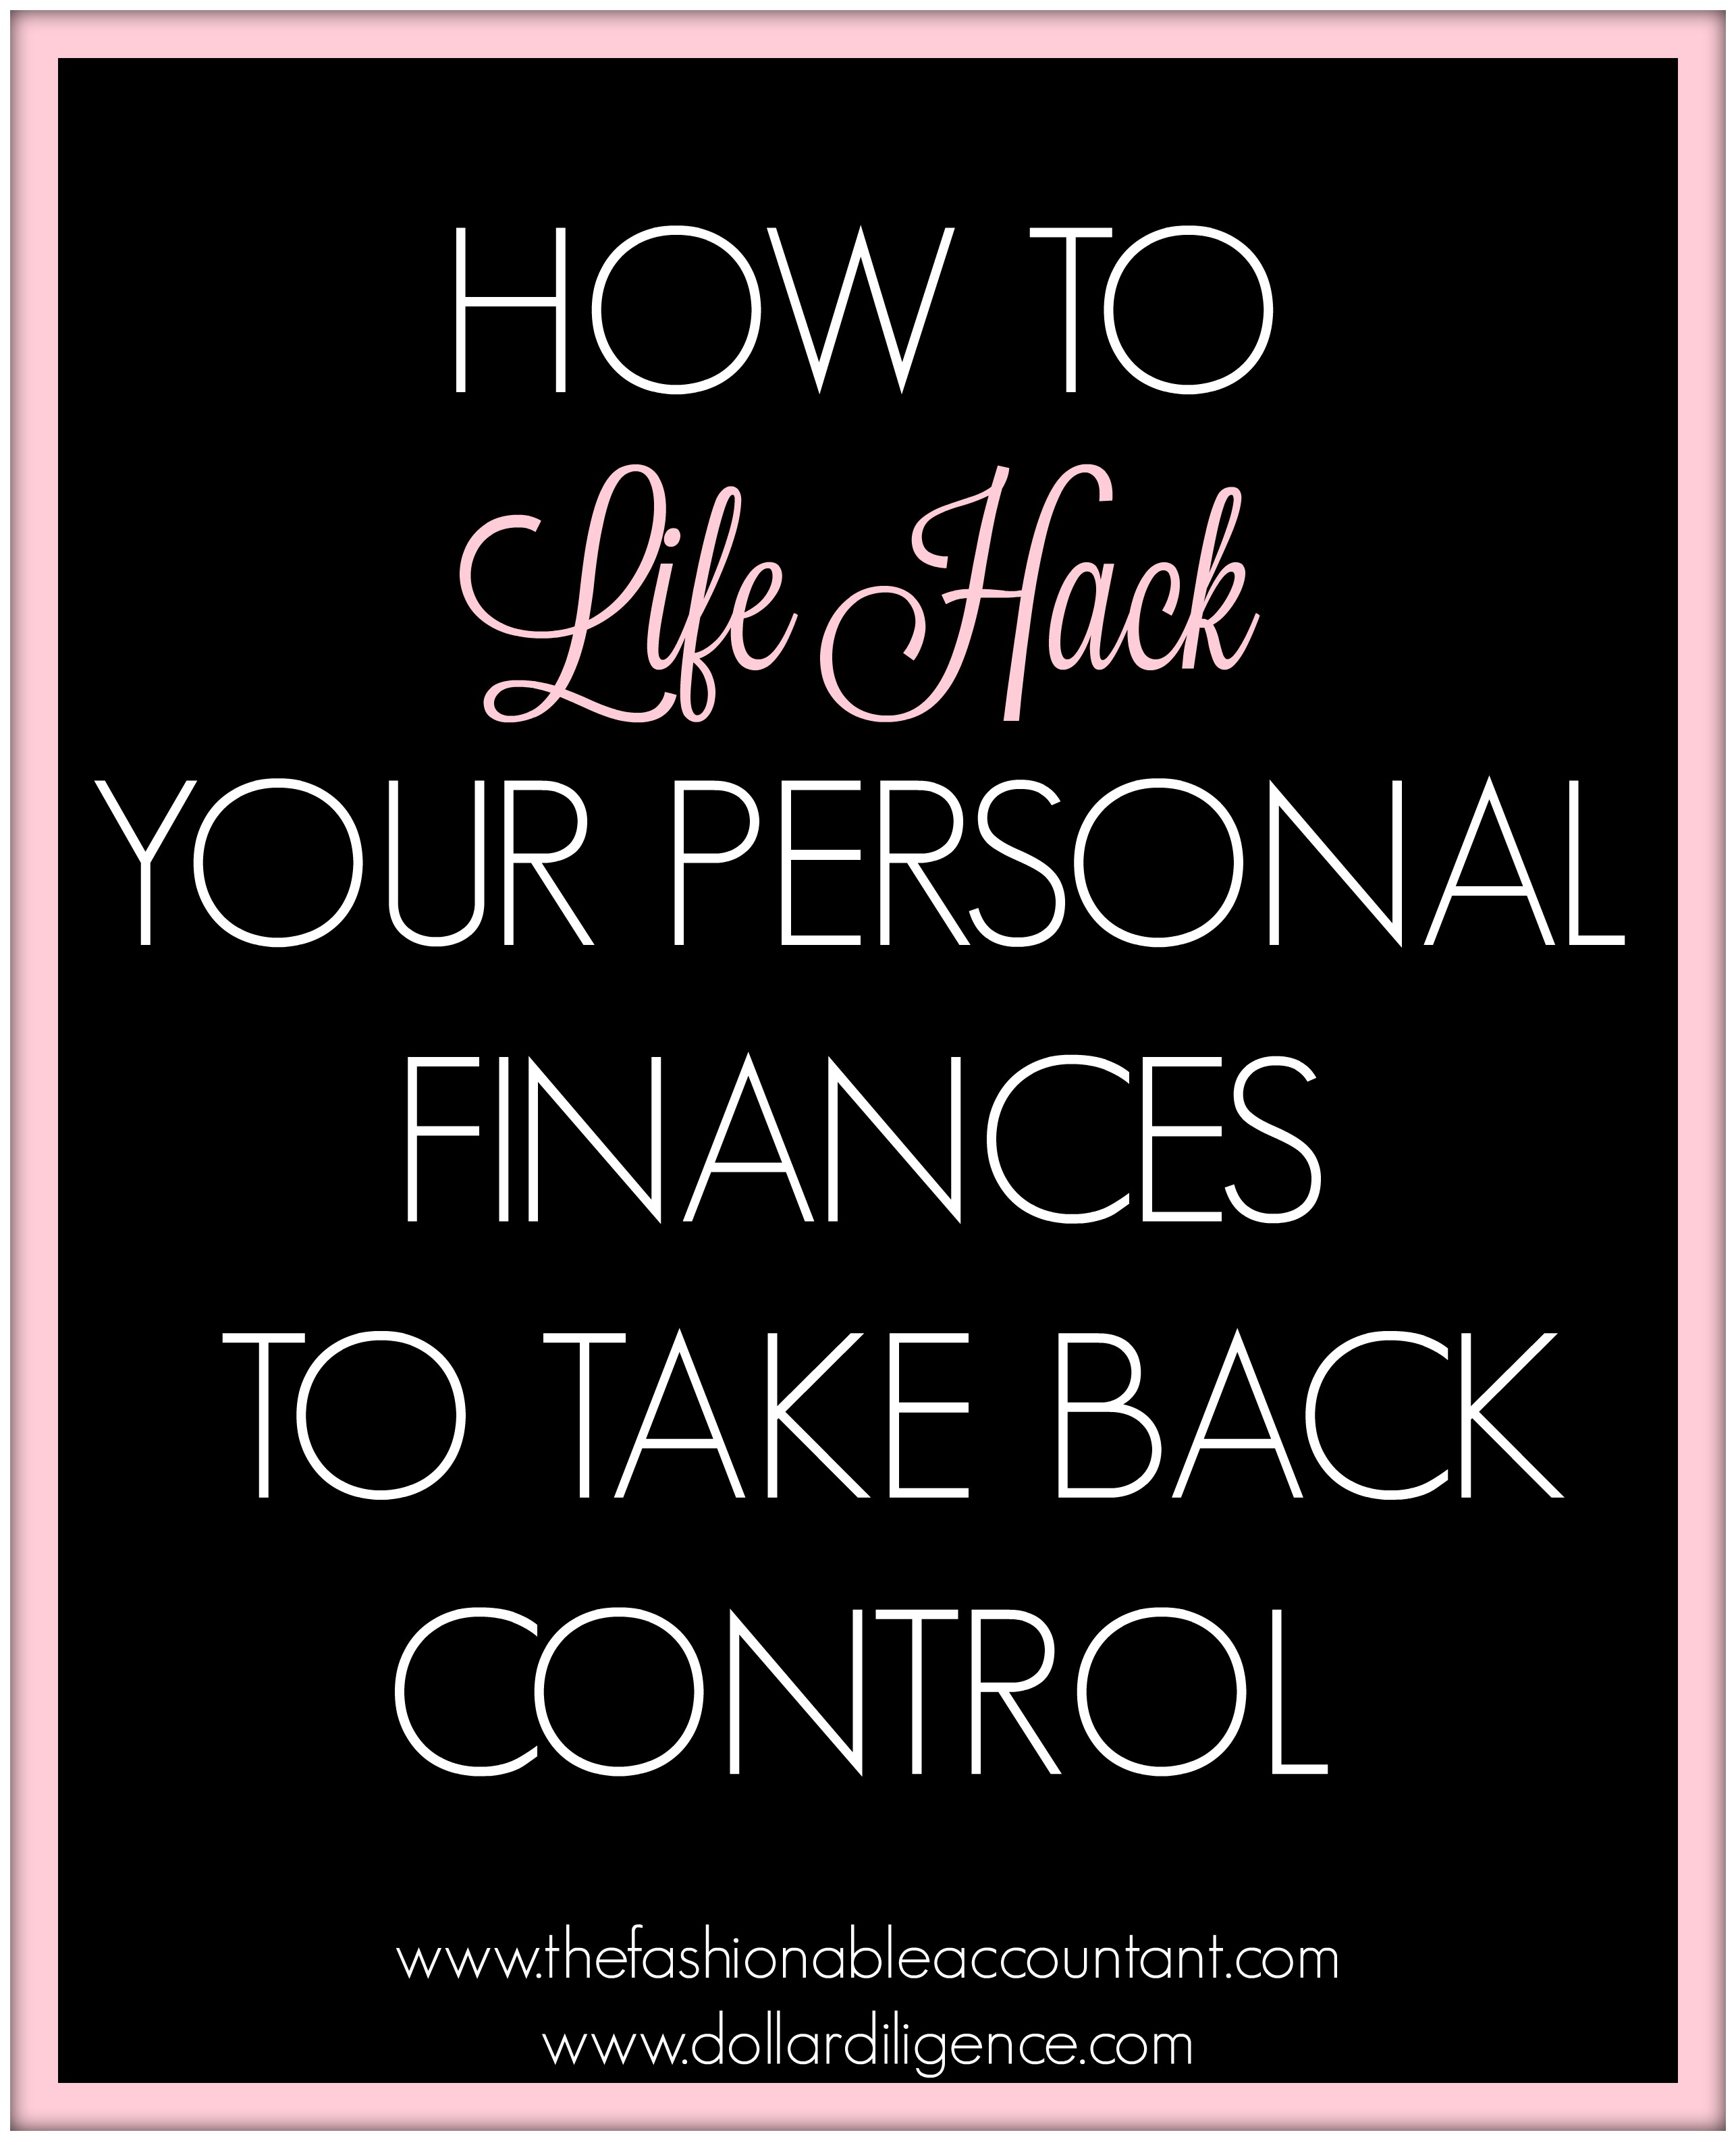 LIFE HACK YOUR PERSONAL FINANCES - FASHION & FINANCE FRIDAY